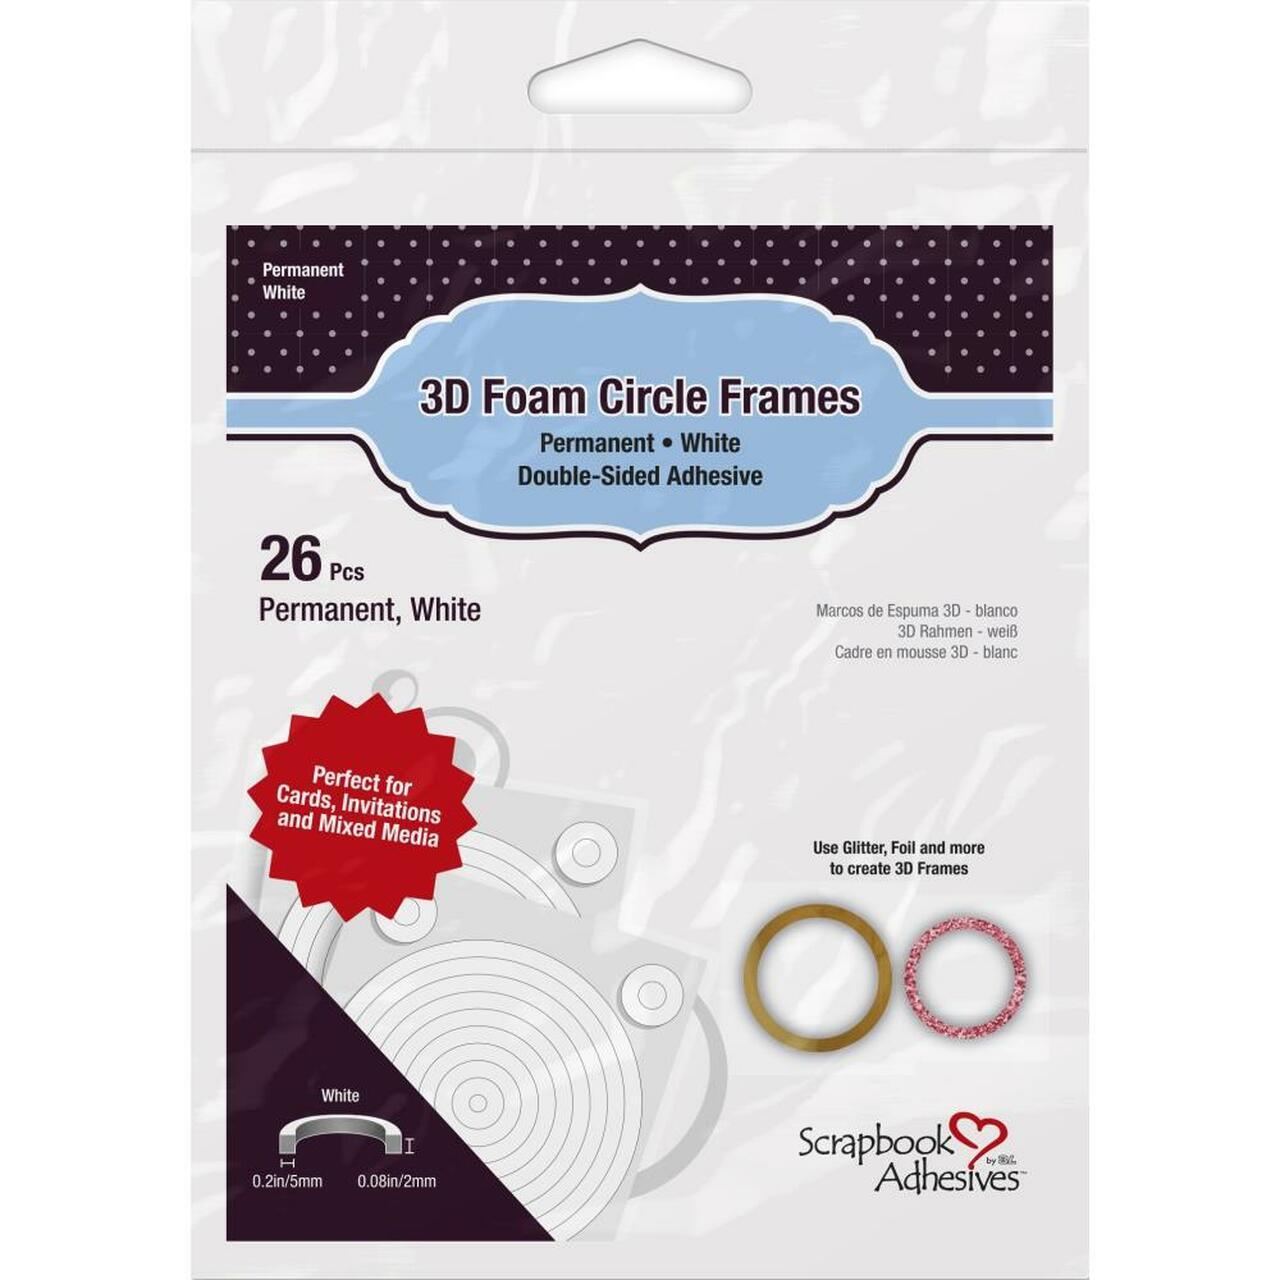 Foam Collection 3D White Foam Circle Frames, Double-Sided, Self-Adhesive, Permanent Foam Circle Frames - 26 pieces - Scrapbook Supply Companies